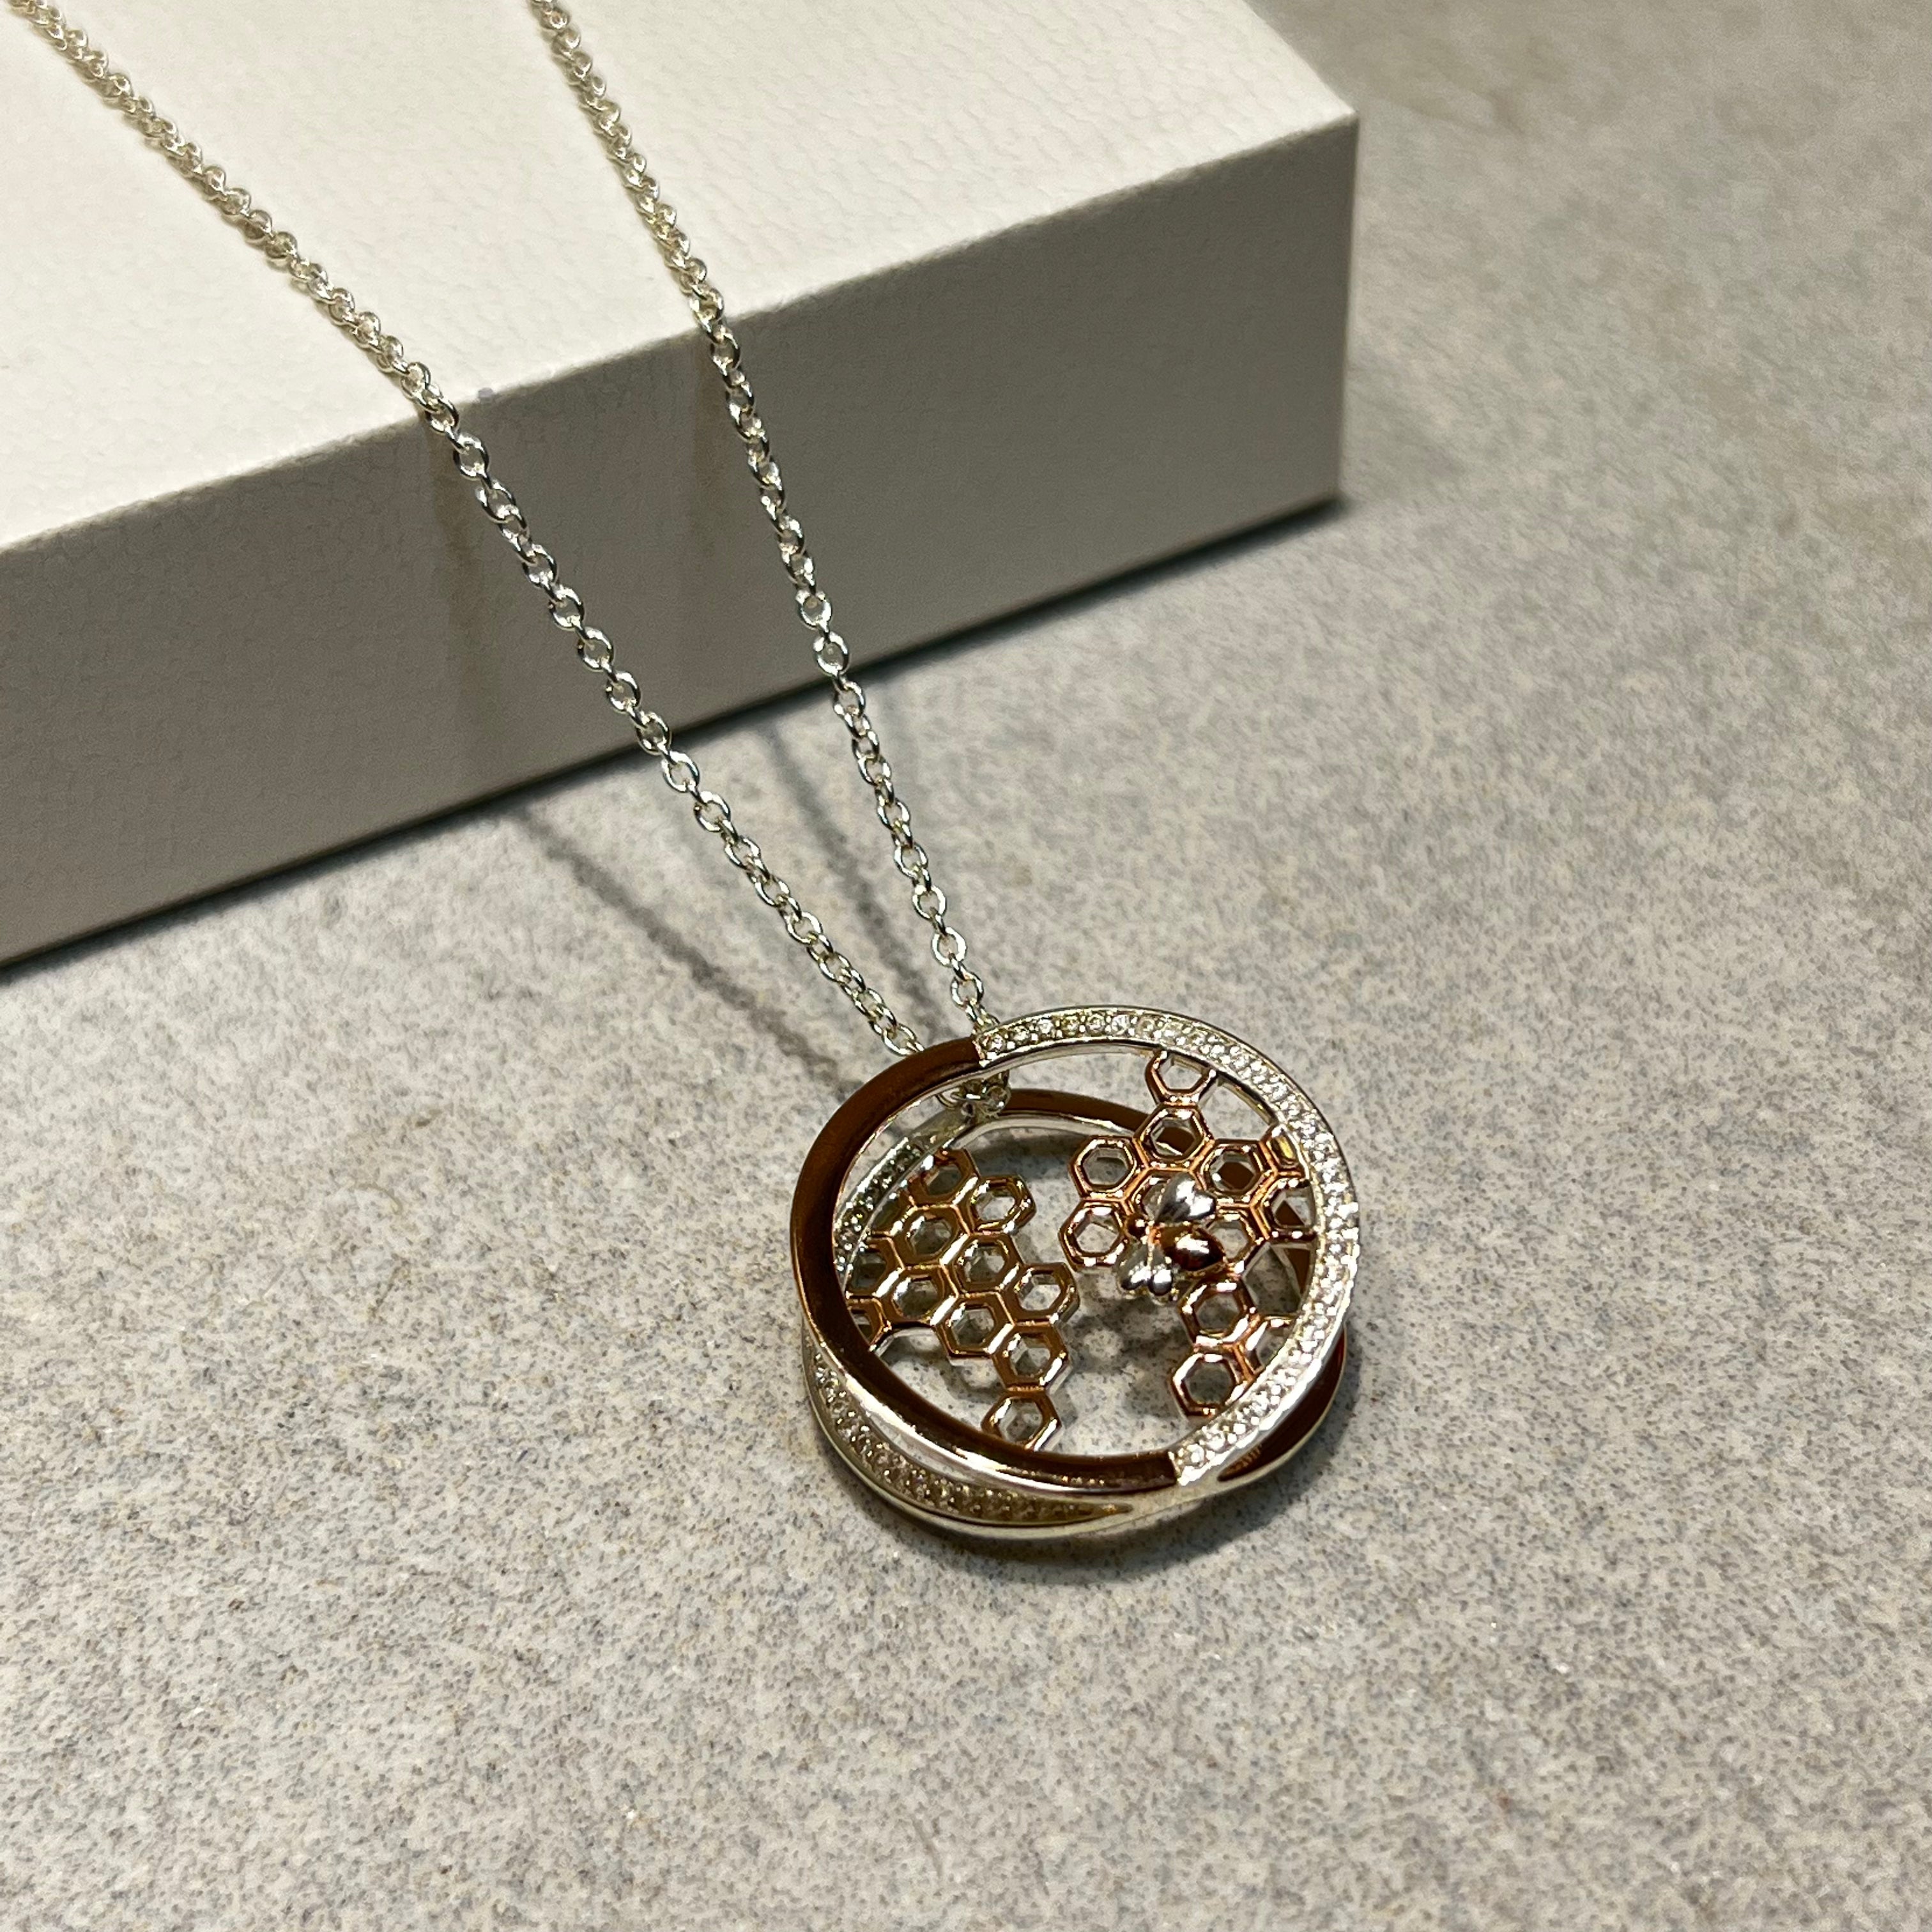 Unique & Co Sterling Silver & Rose Gold Bee & Honeycomb Pendant